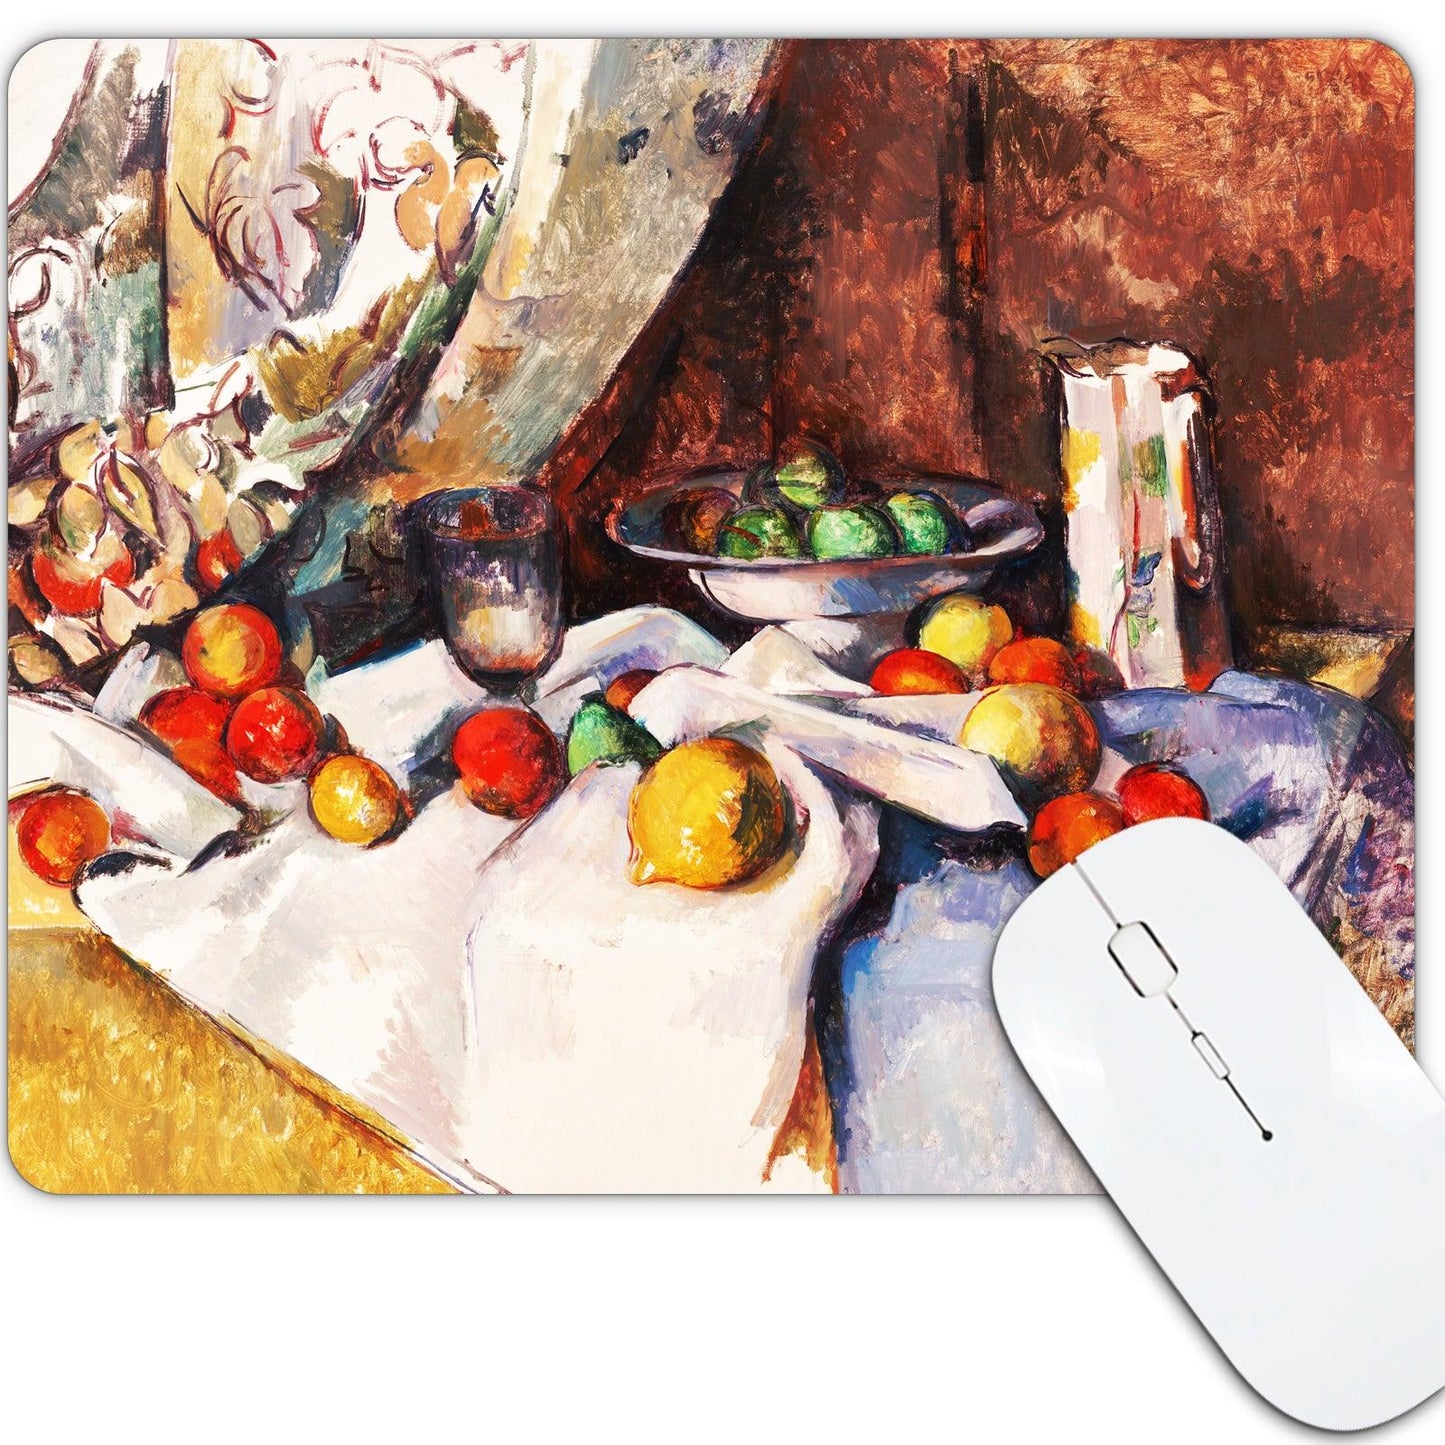 Art Square Mouse Pad 9.5 x 7.9 Inches (Still Life by Paul Cezanne) - Berkin Arts